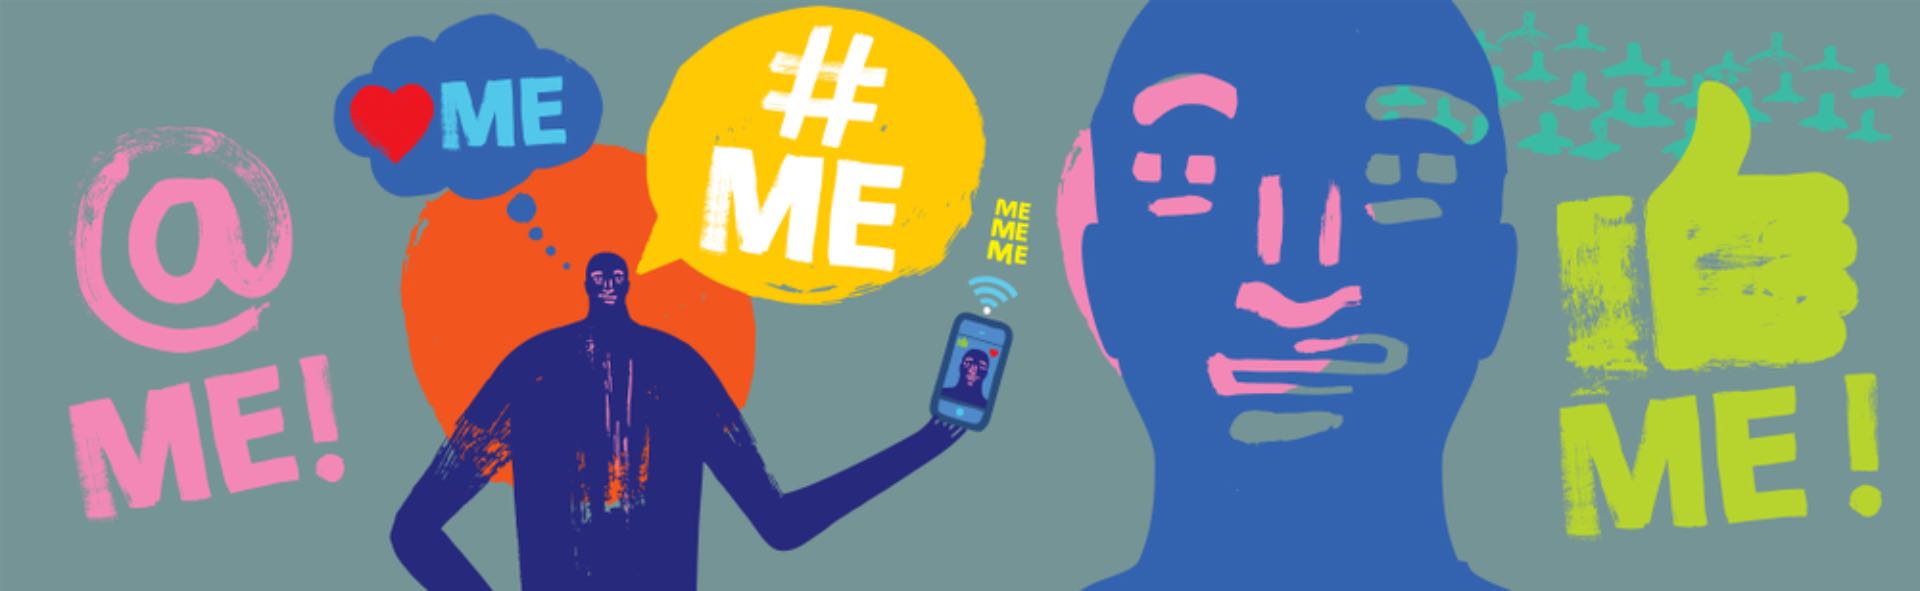 stop the me me me talk when building a strong brand identity